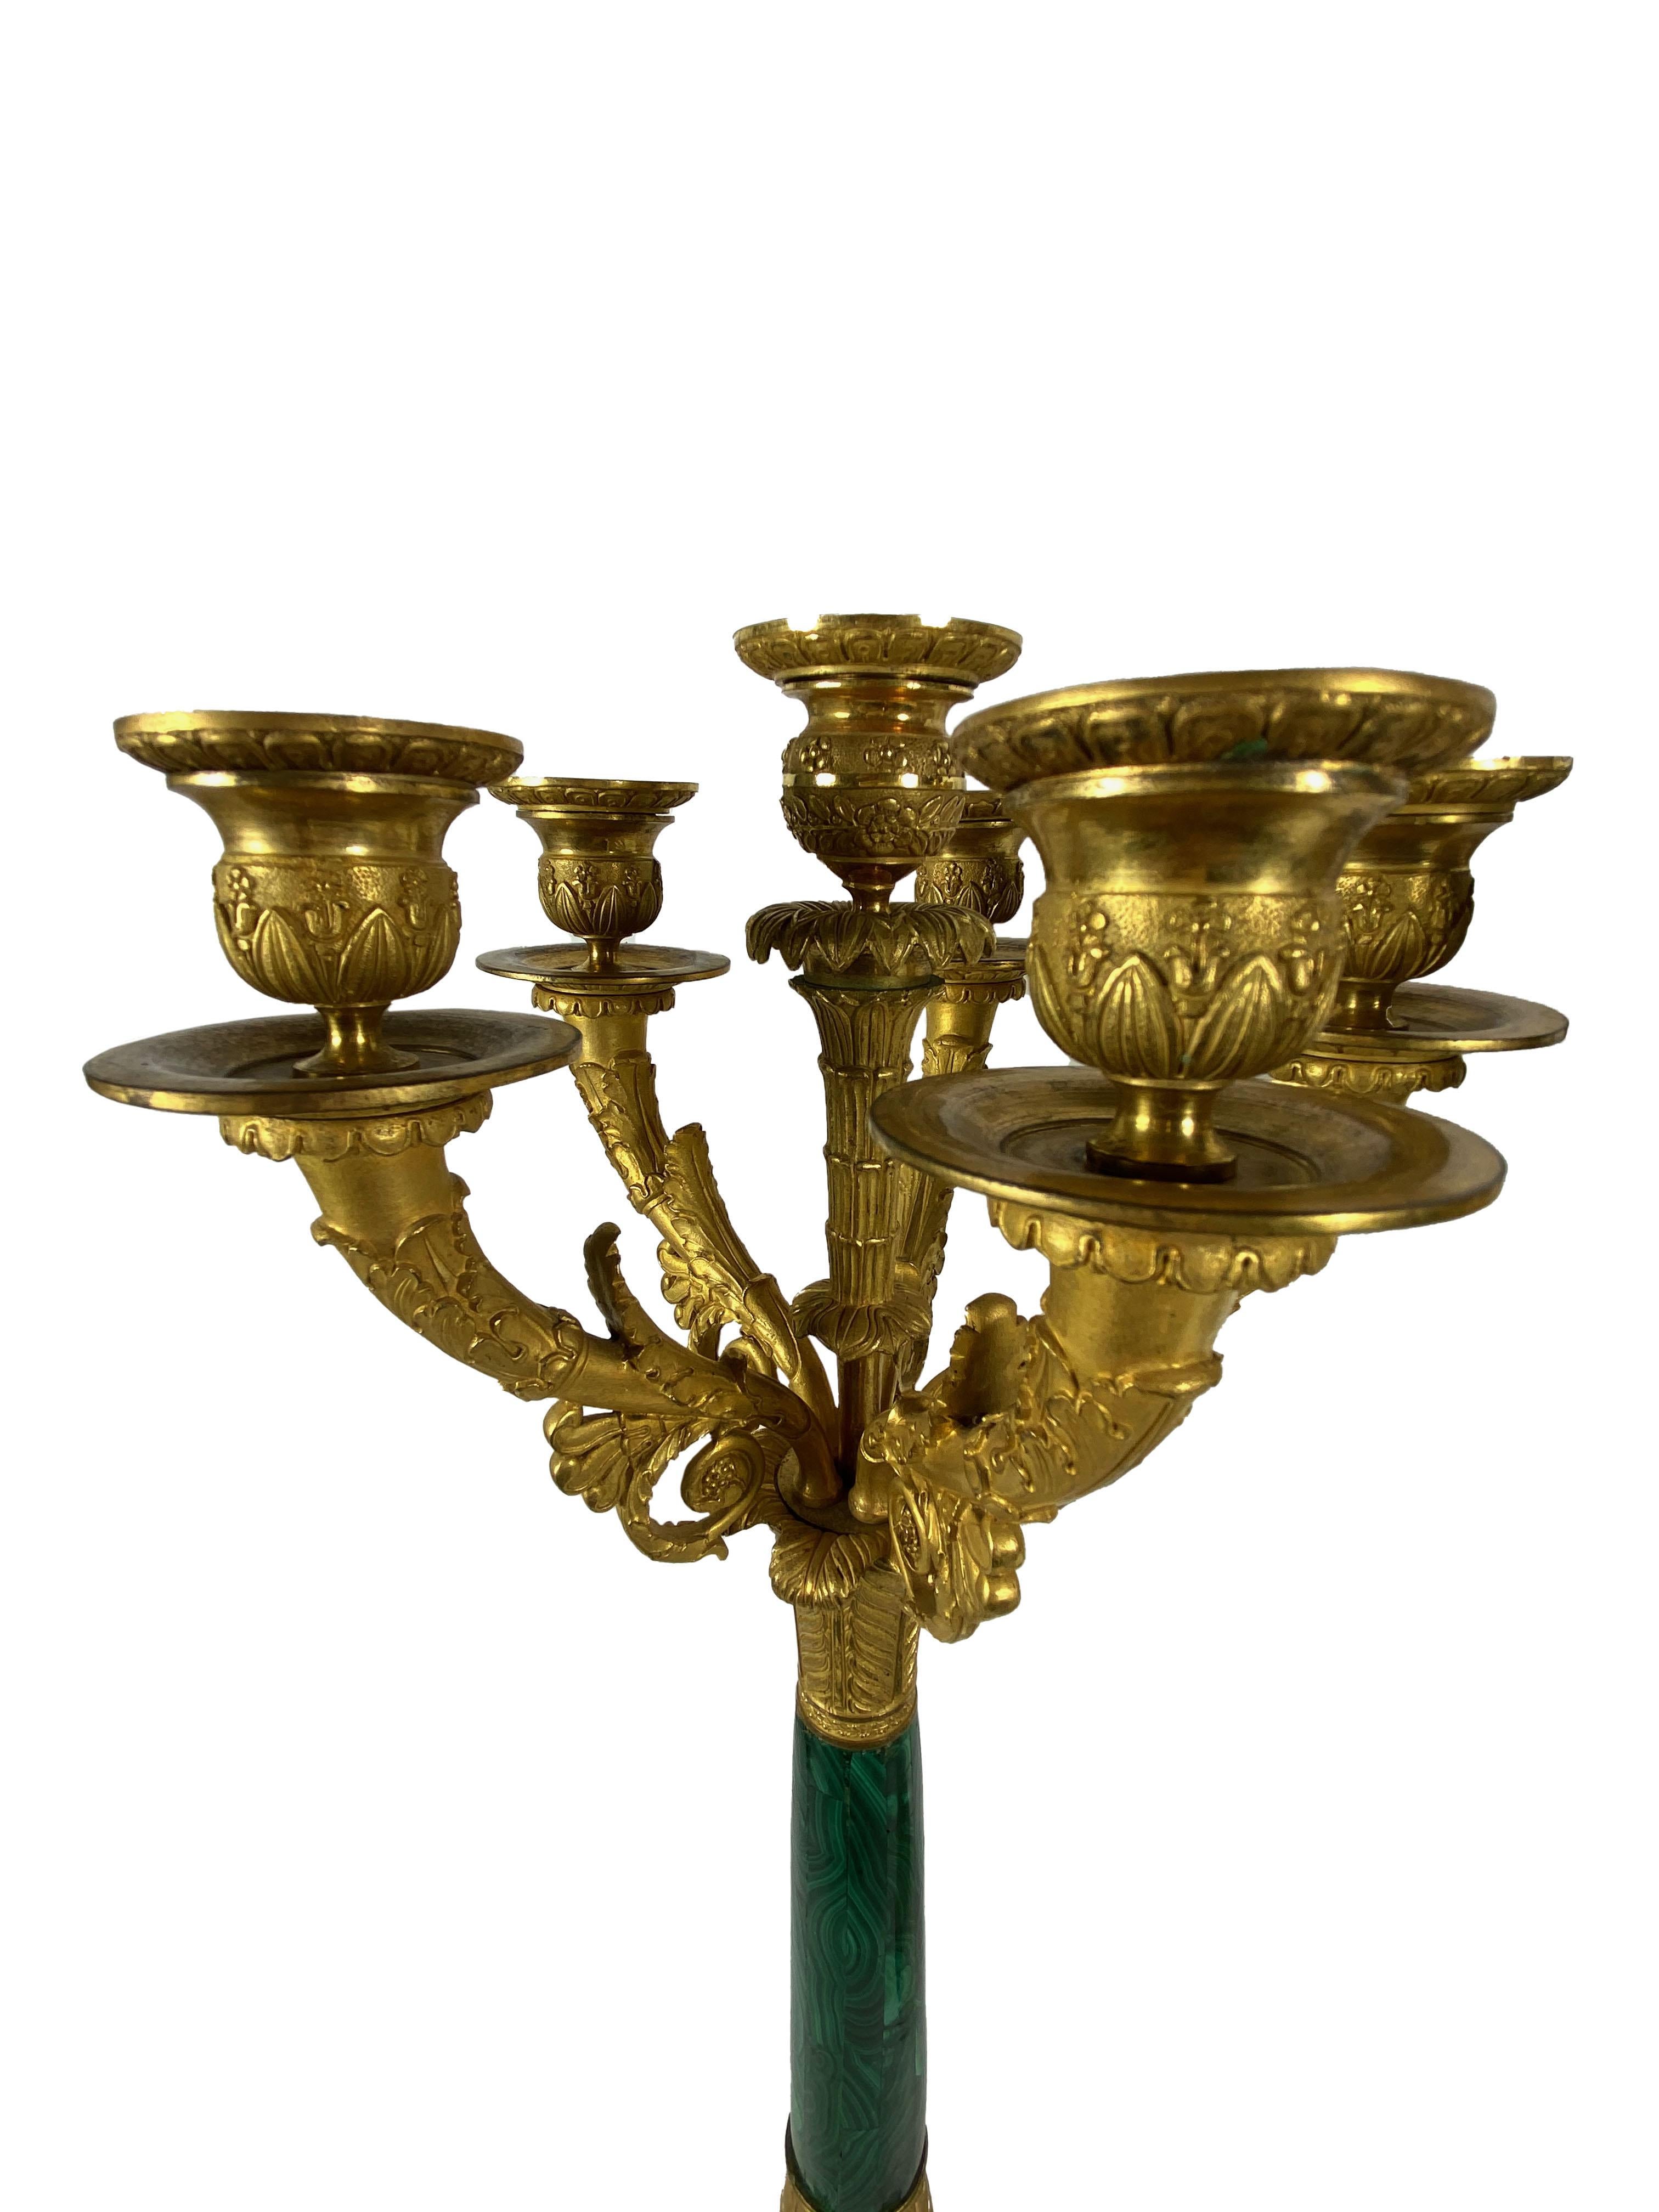 1870 French Empire Style Bronze Dore Candleholders, a Pair In Good Condition For Sale In Dallas, TX